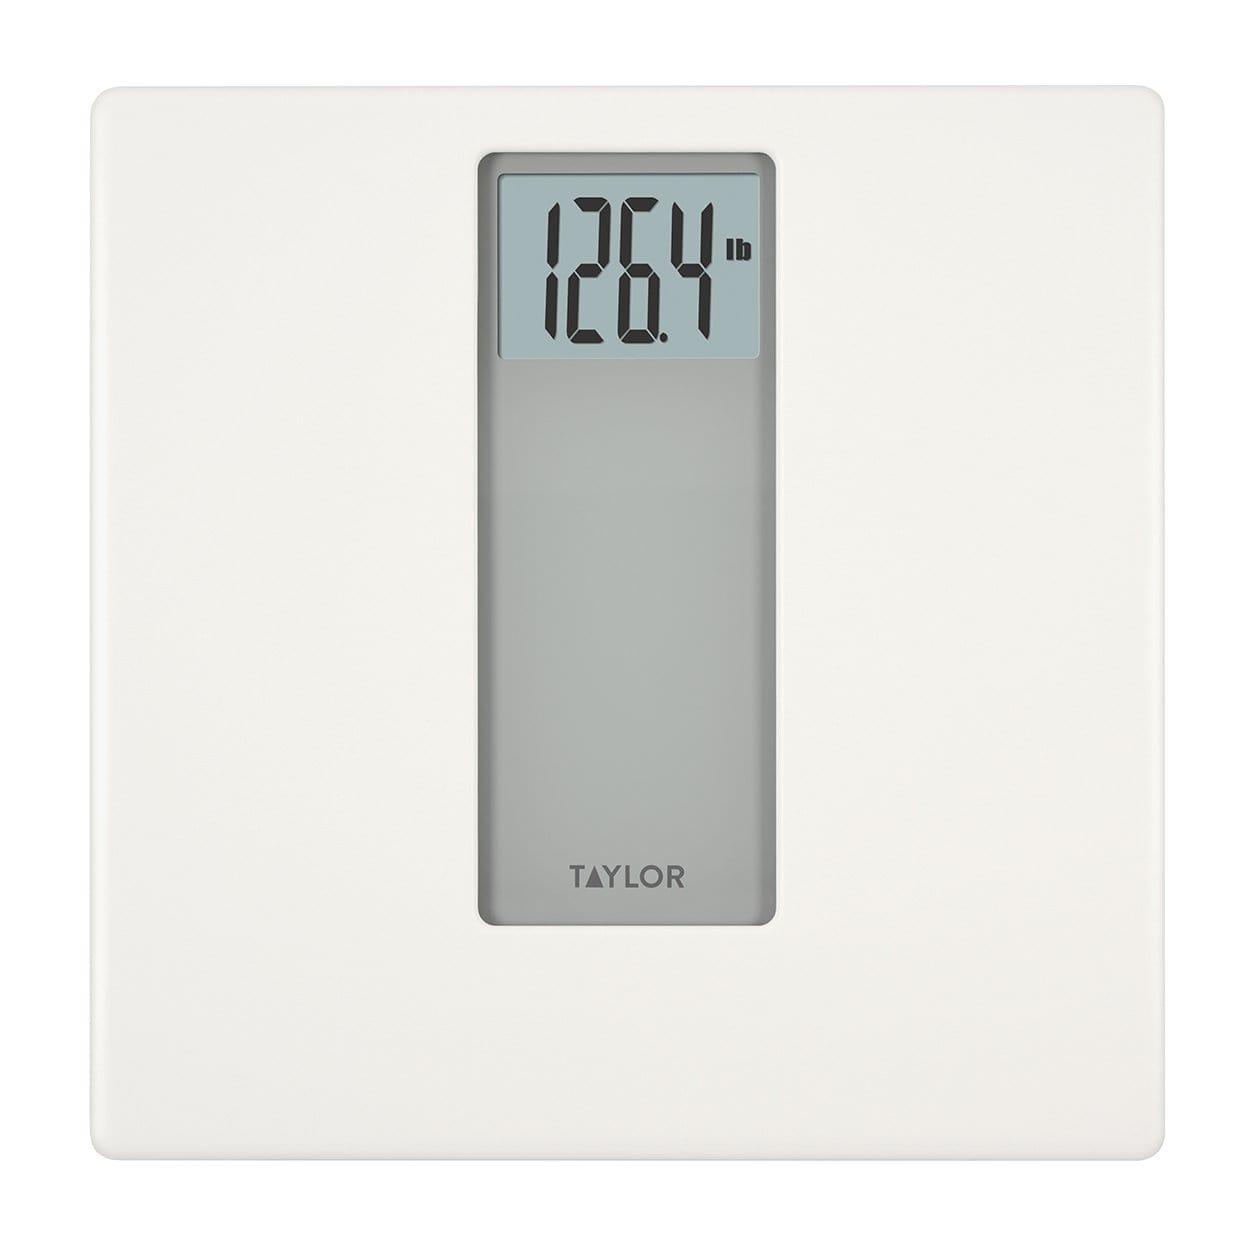 Taylor Pure White Digital Bathroom Scale 752840133 – Good's Store Online